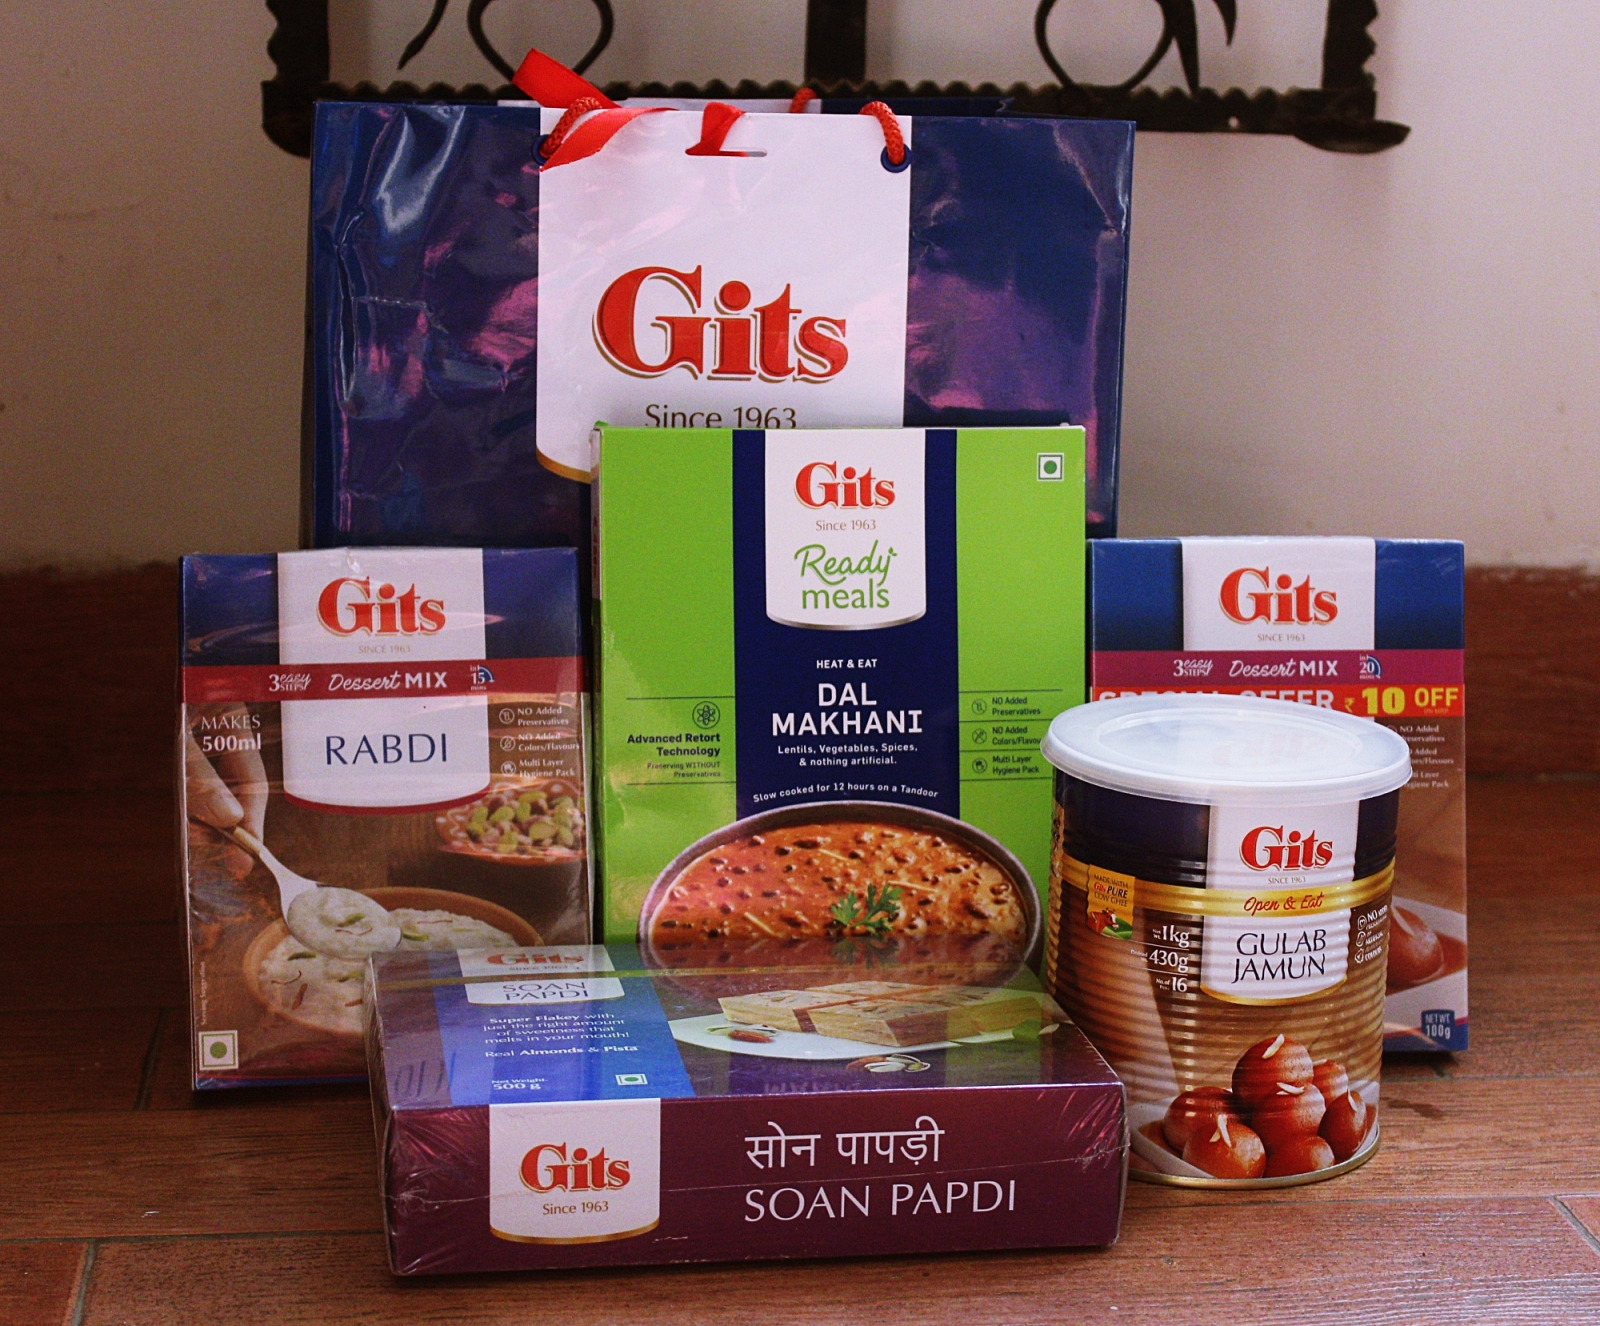 Gits: The brand that introduced Instant Mixes to India